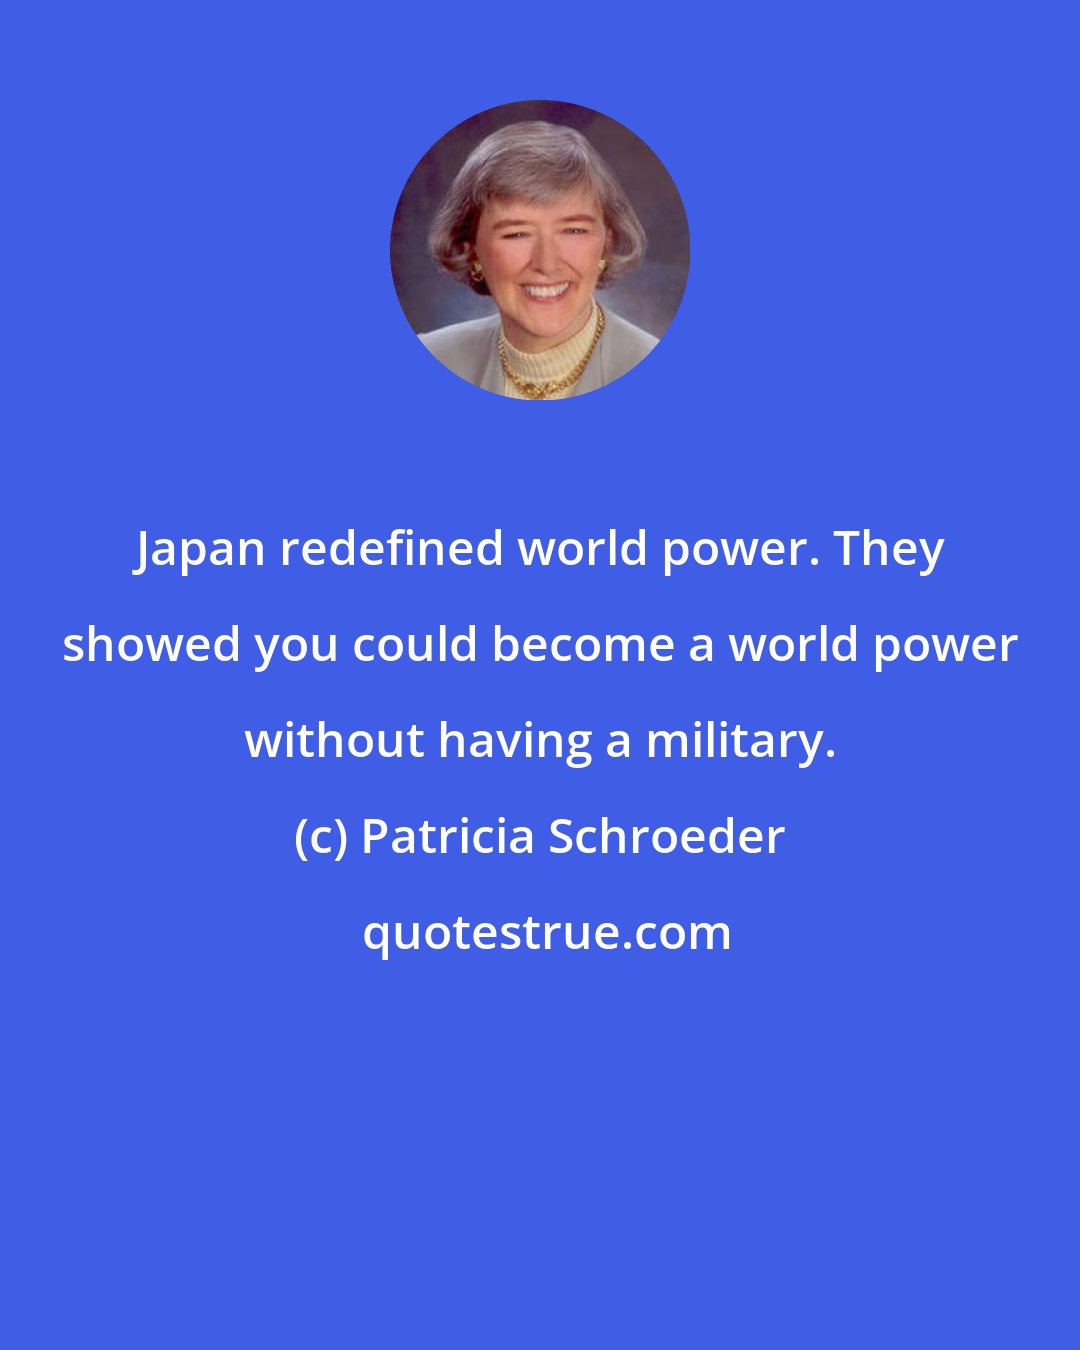 Patricia Schroeder: Japan redefined world power. They showed you could become a world power without having a military.